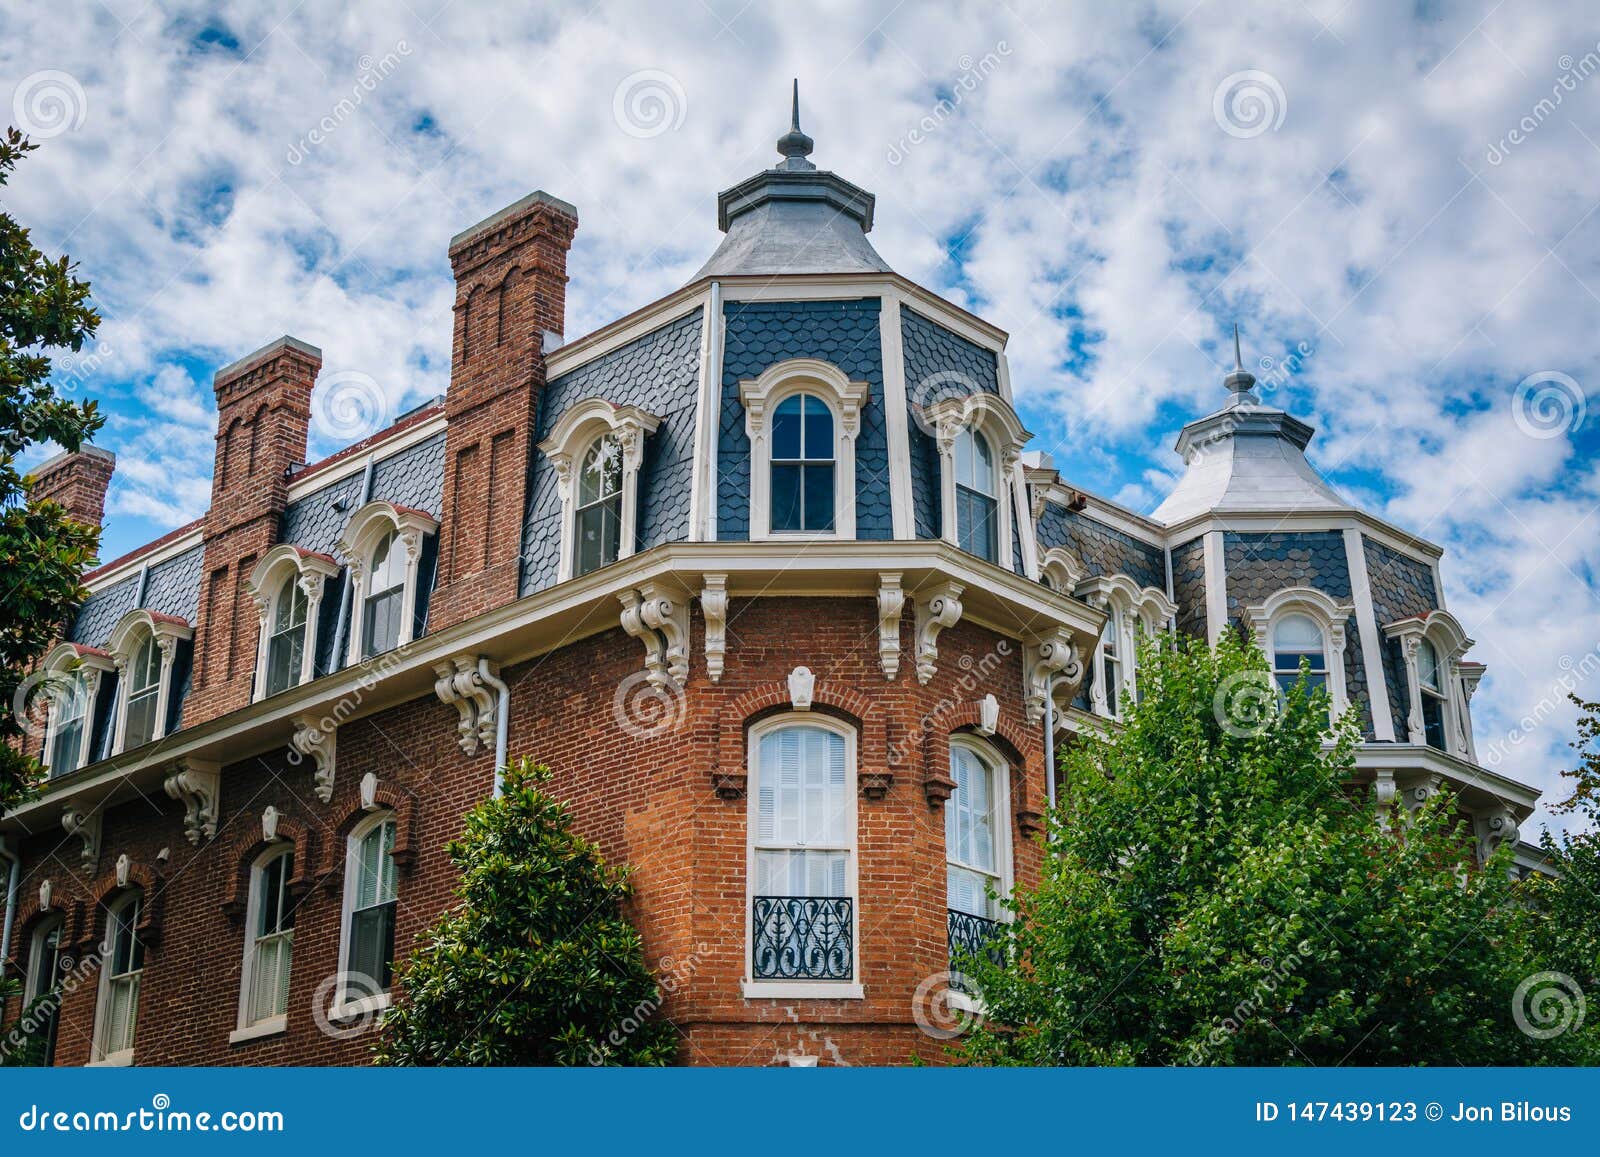 architectural details of a house in georgetown, washington, dc